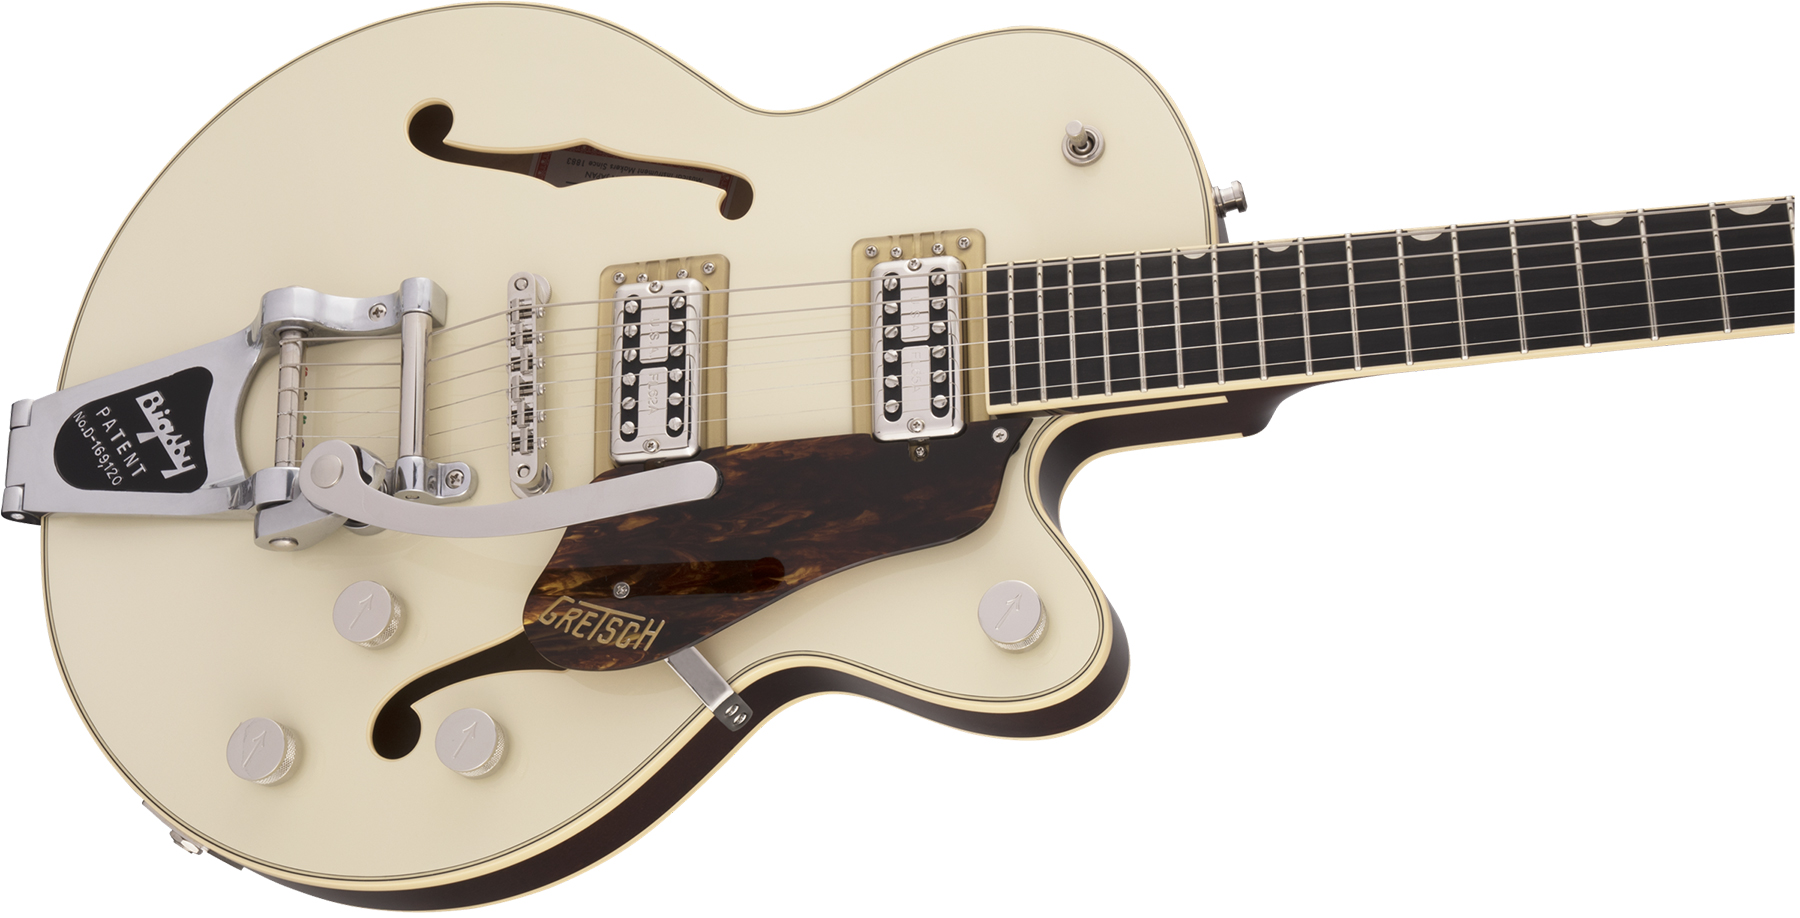 Gretsch G6659t Broadkaster Jr Center Bloc Players Edition Nashville Pro Japon Bigsby Eb - Two-tone Lotus Ivory/walnut Stain - Semi-Hollow E-Gitarre - 